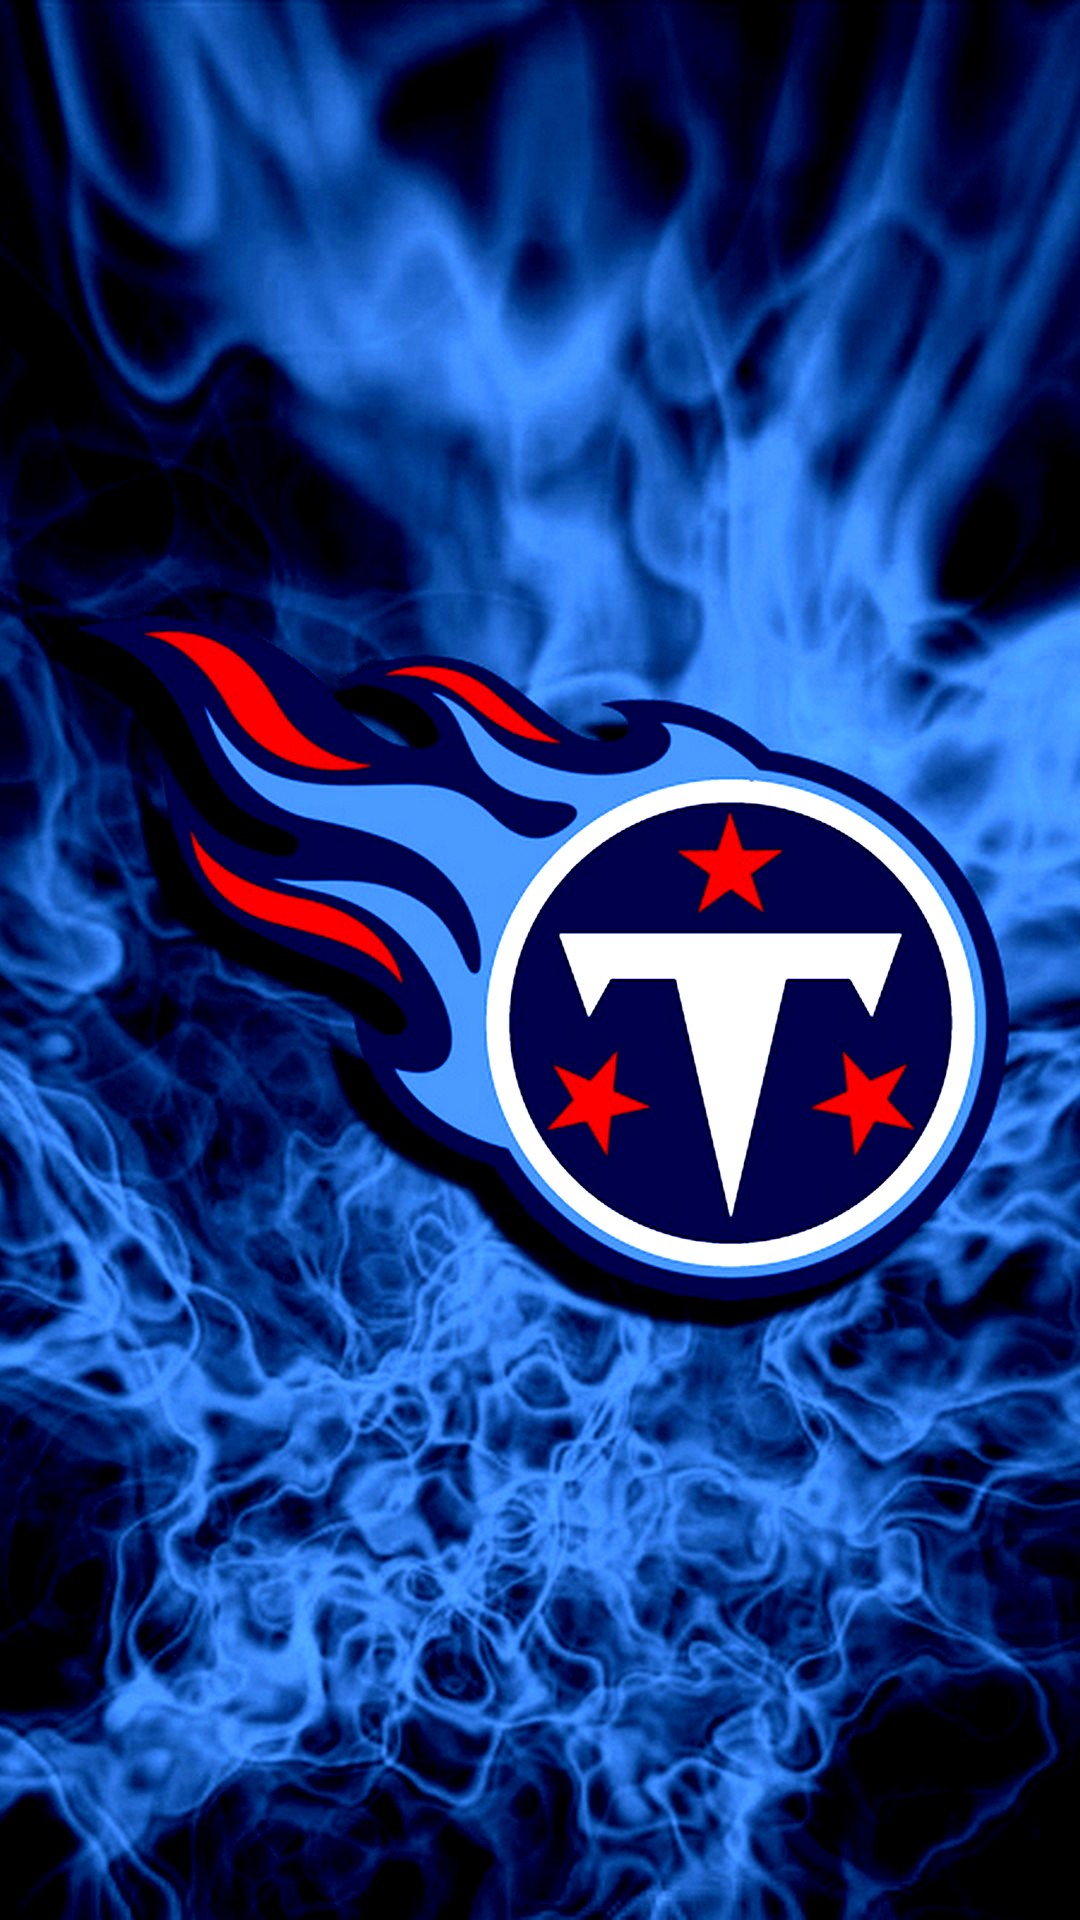 Screensaver iPhone Tennessee Titans With high-resolution 1080X1920 pixel. Donwload and set as wallpaper for your iPhone X, iPhone XS home screen backgrounds, XS Max, XR, iPhone8 lock screen wallpaper, iPhone 7, 6, SE, and other mobile devices